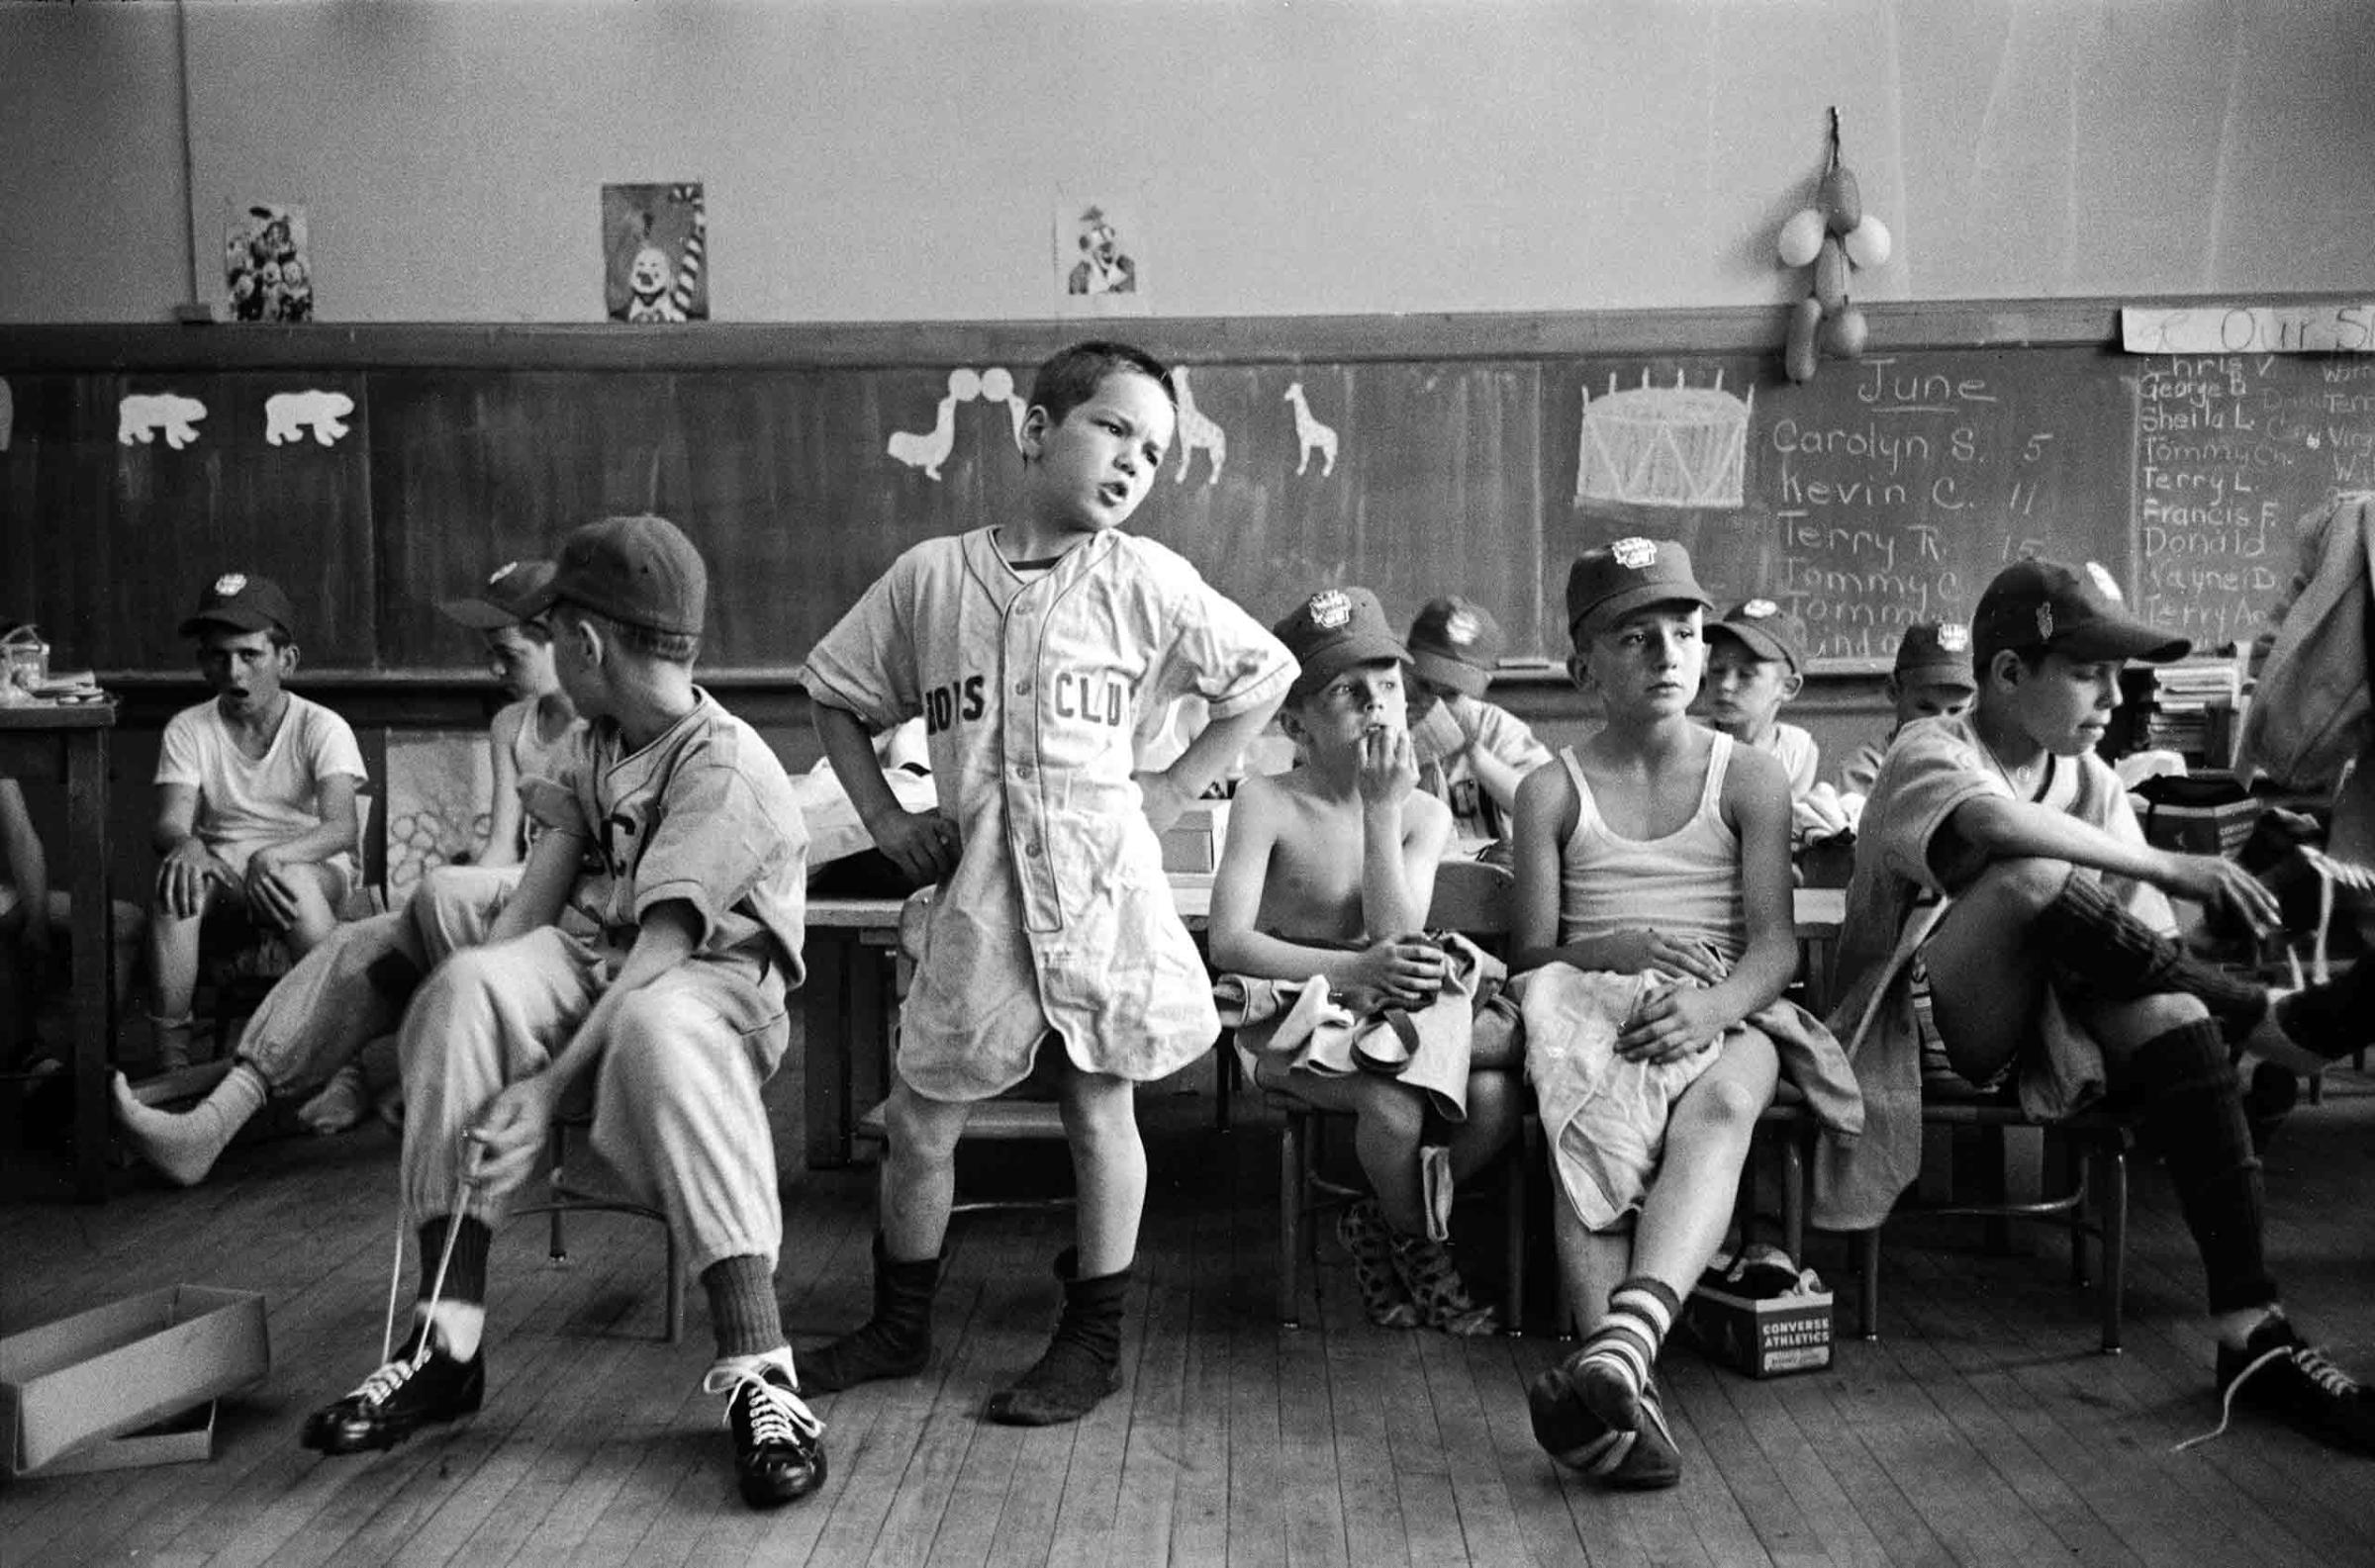 In a kindergarten classroom, baseball players try on new uniforms as Dick Williams (center) and others anxiously await missing parts of outfits, 1954.